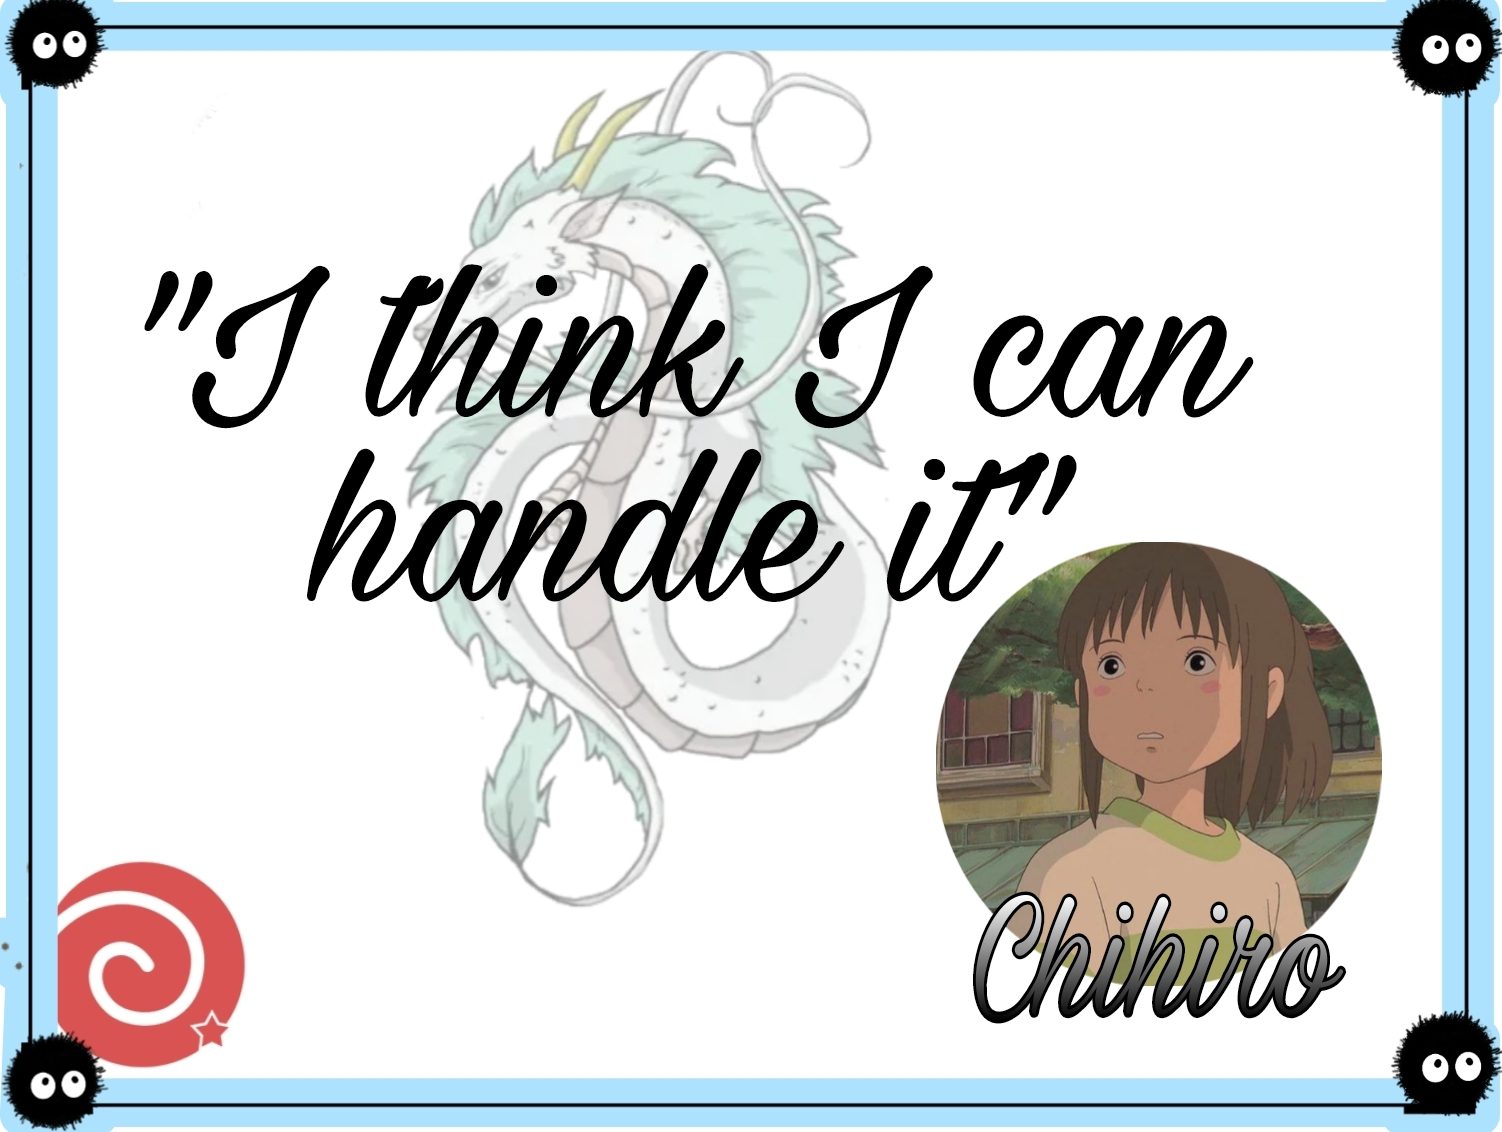 Quotes from Chihiro